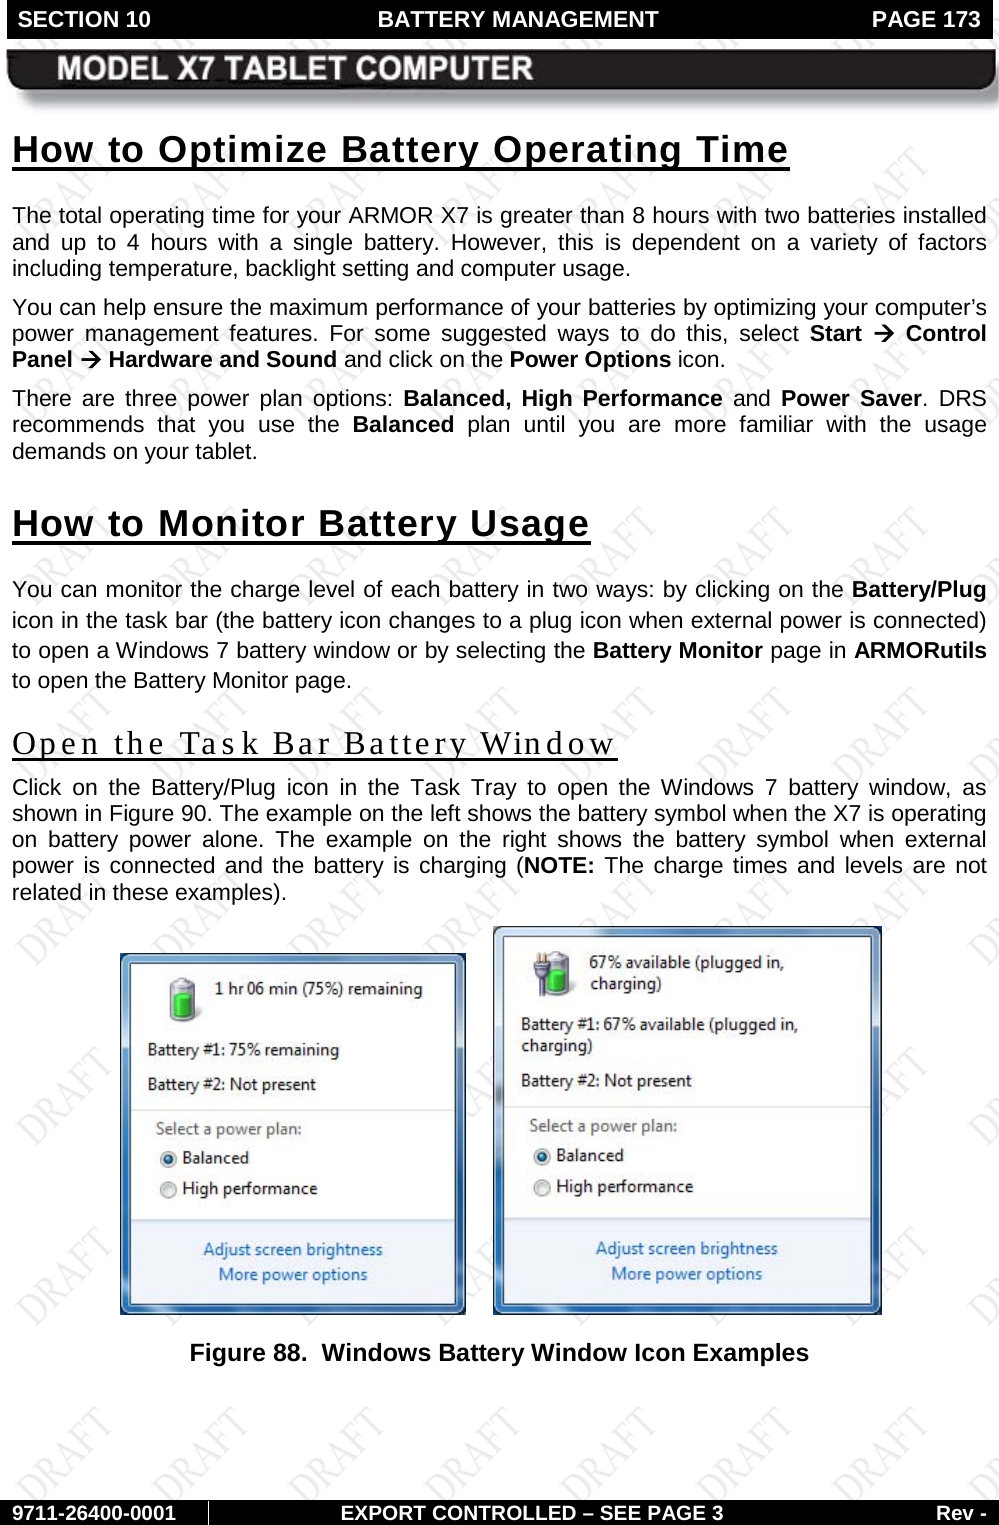 SECTION 10 BATTERY MANAGEMENT  PAGE 173        9711-26400-0001 EXPORT CONTROLLED – SEE PAGE 3 Rev - How to Optimize Battery Operating Time The total operating time for your ARMOR X7 is greater than 8 hours with two batteries installed and up to 4 hours with a single battery. However, this is dependent on a variety of factors including temperature, backlight setting and computer usage.  You can help ensure the maximum performance of your batteries by optimizing your computer’s power management features. For some suggested ways to do this, select Start  à Control Panel à Hardware and Sound and click on the Power Options icon. There are three power plan options: Balanced,  High  Performance and  Power  Saver.  DRS recommends that you use the Balanced plan until you are more familiar with the usage demands on your tablet. How to Monitor Battery Usage You can monitor the charge level of each battery in two ways: by clicking on the Battery/Plug icon in the task bar (the battery icon changes to a plug icon when external power is connected) to open a Windows 7 battery window or by selecting the Battery Monitor page in ARMORutils to open the Battery Monitor page.  Open the Task Bar Battery Window Click on the Battery/Plug icon in the Task Tray to open the Windows 7 battery window, as shown in Figure 90. The example on the left shows the battery symbol when the X7 is operating on battery power alone. The example on the right shows the battery symbol when external power is connected and the battery is charging (NOTE: The charge times and levels are not related in these examples).       Figure 88.  Windows Battery Window Icon Examples    